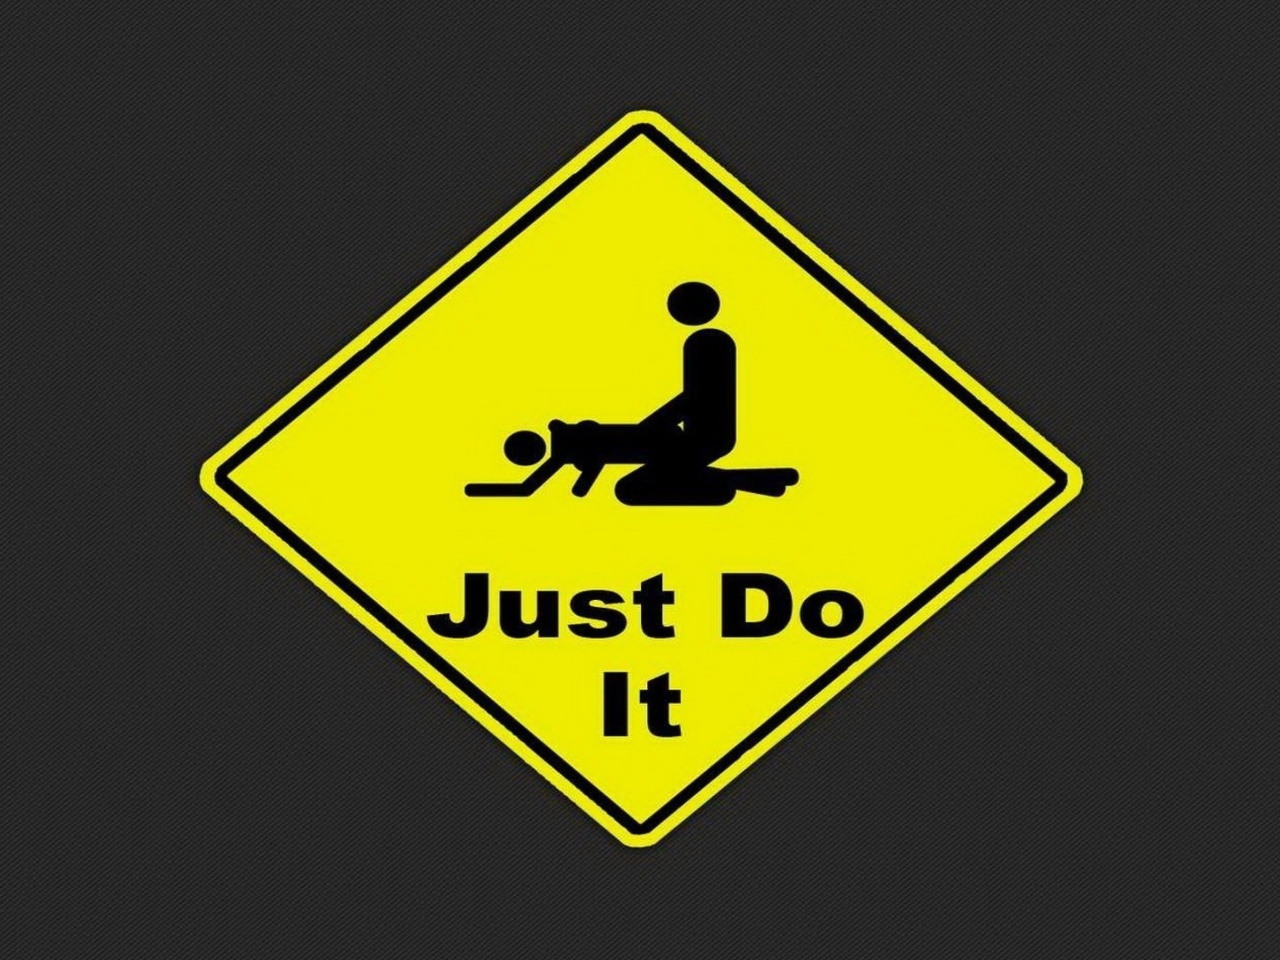 Just Do It Funny Sign wallpaper 1280x960